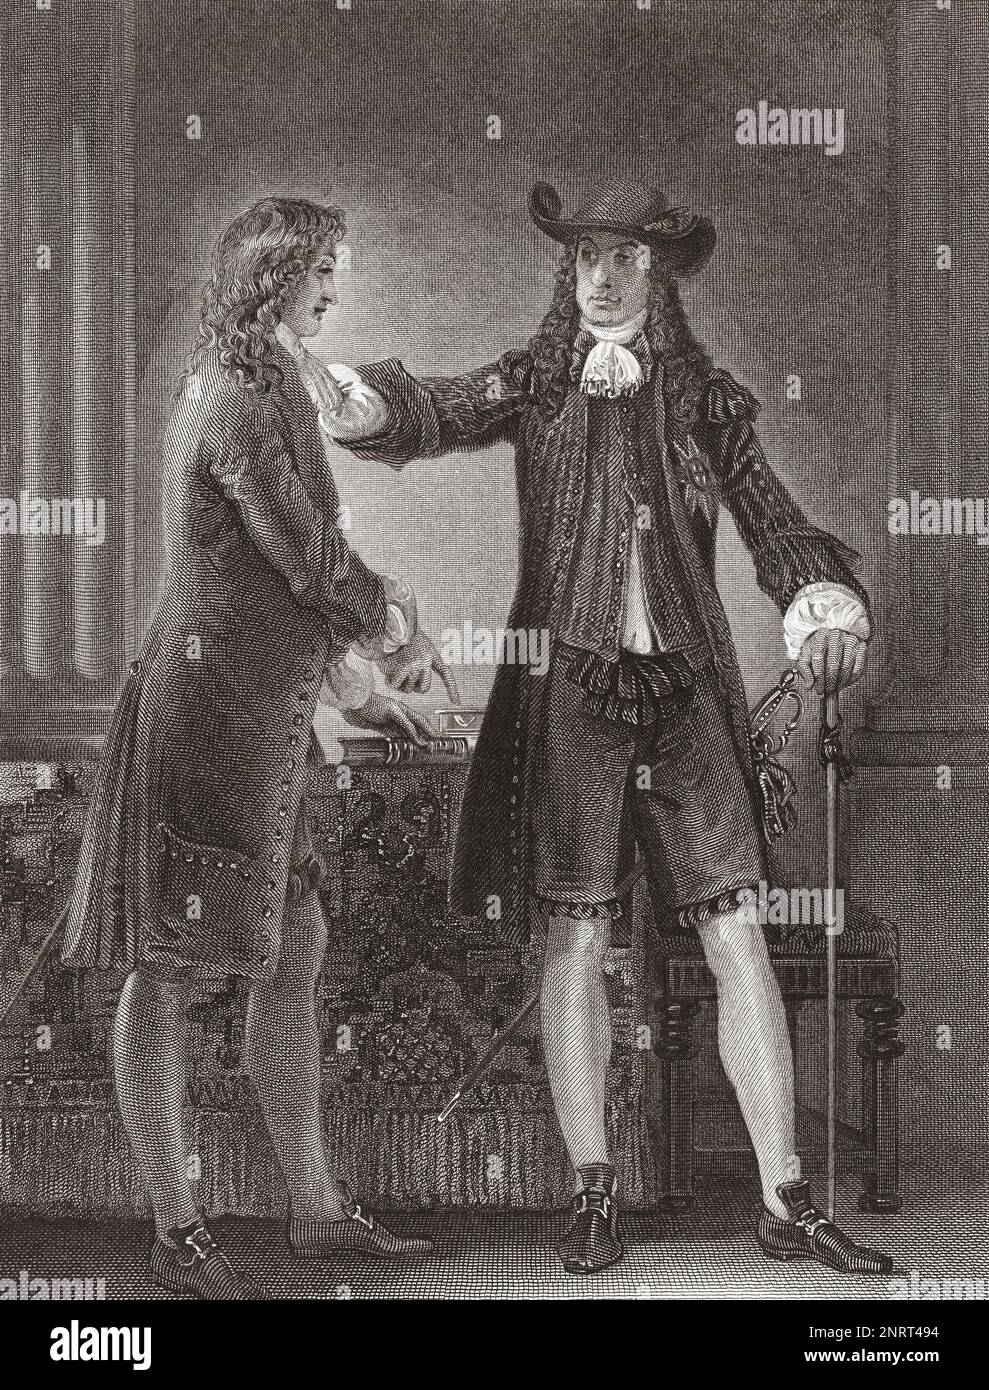 Sir William Temple, 1628 - 1699, English statesman, with King Charles II to whom he was an advisor.  After falling out with the King he retired from politics and devoted himself to gardening and essay writing.  After a print by J. Parker from the work by James Stothard originally featured in Robert Bowyer's Historic Gallery, published between 1793 and 1806. Stock Photo